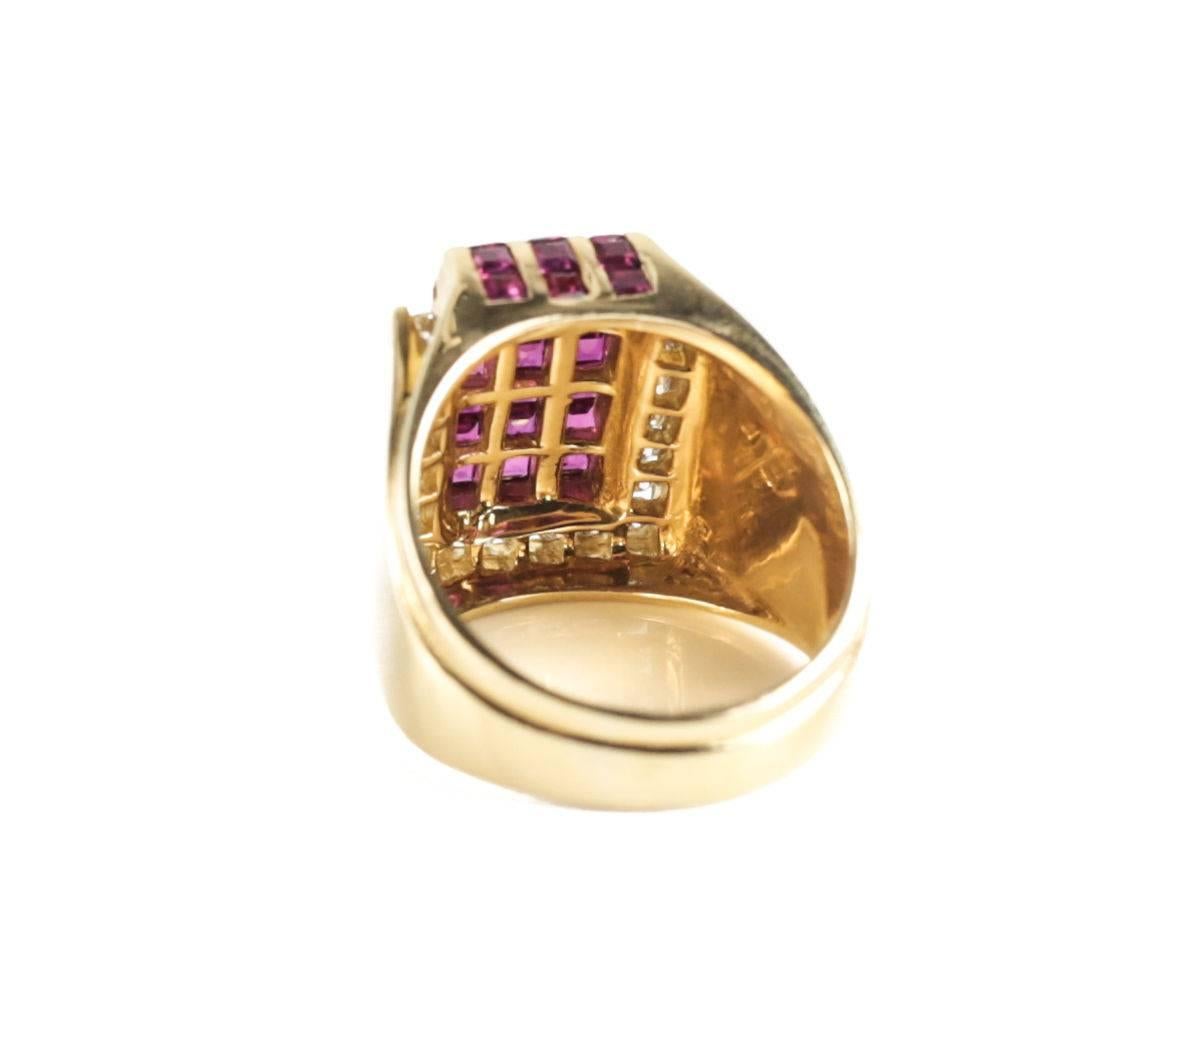 Charles Krypell 18 Karat Yellow Gold Diamond and Ruby Ring In Excellent Condition For Sale In Pasadena, CA